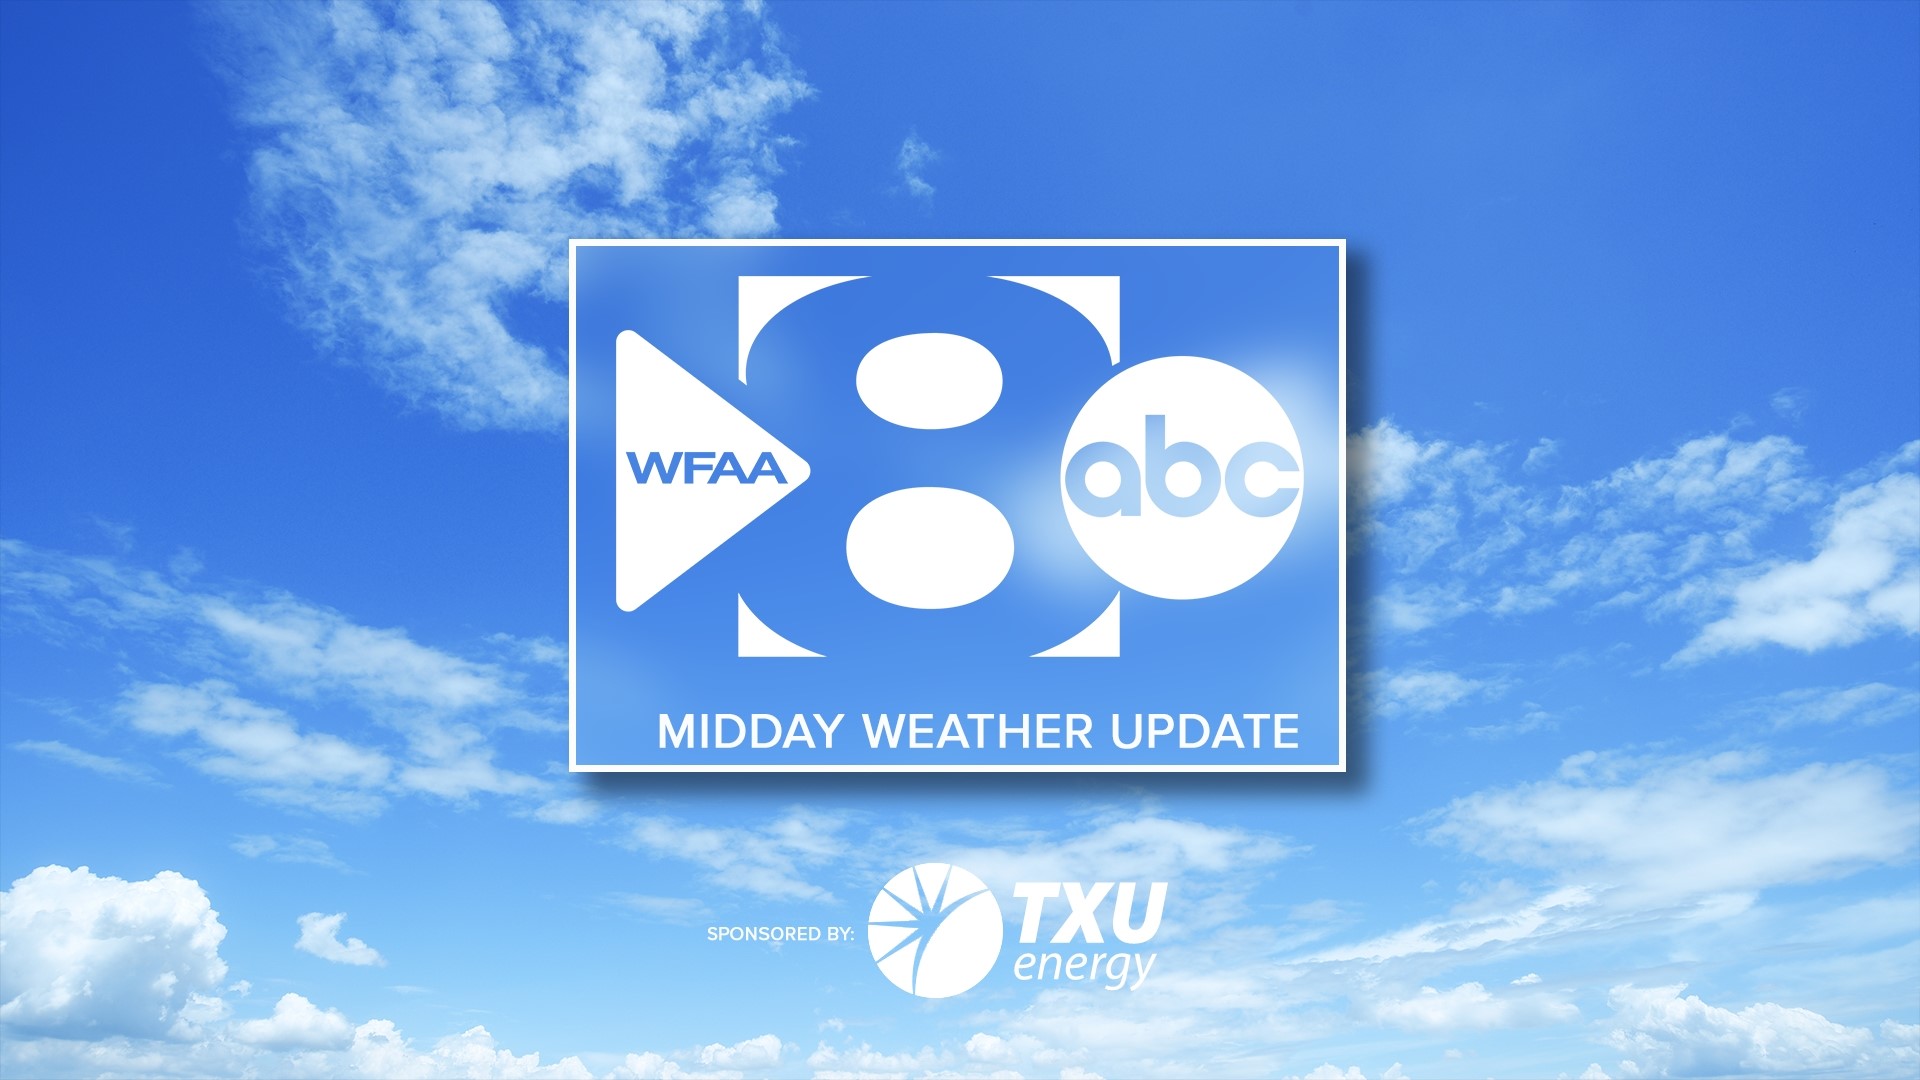 DFW Weather: August 16 midday forecast update